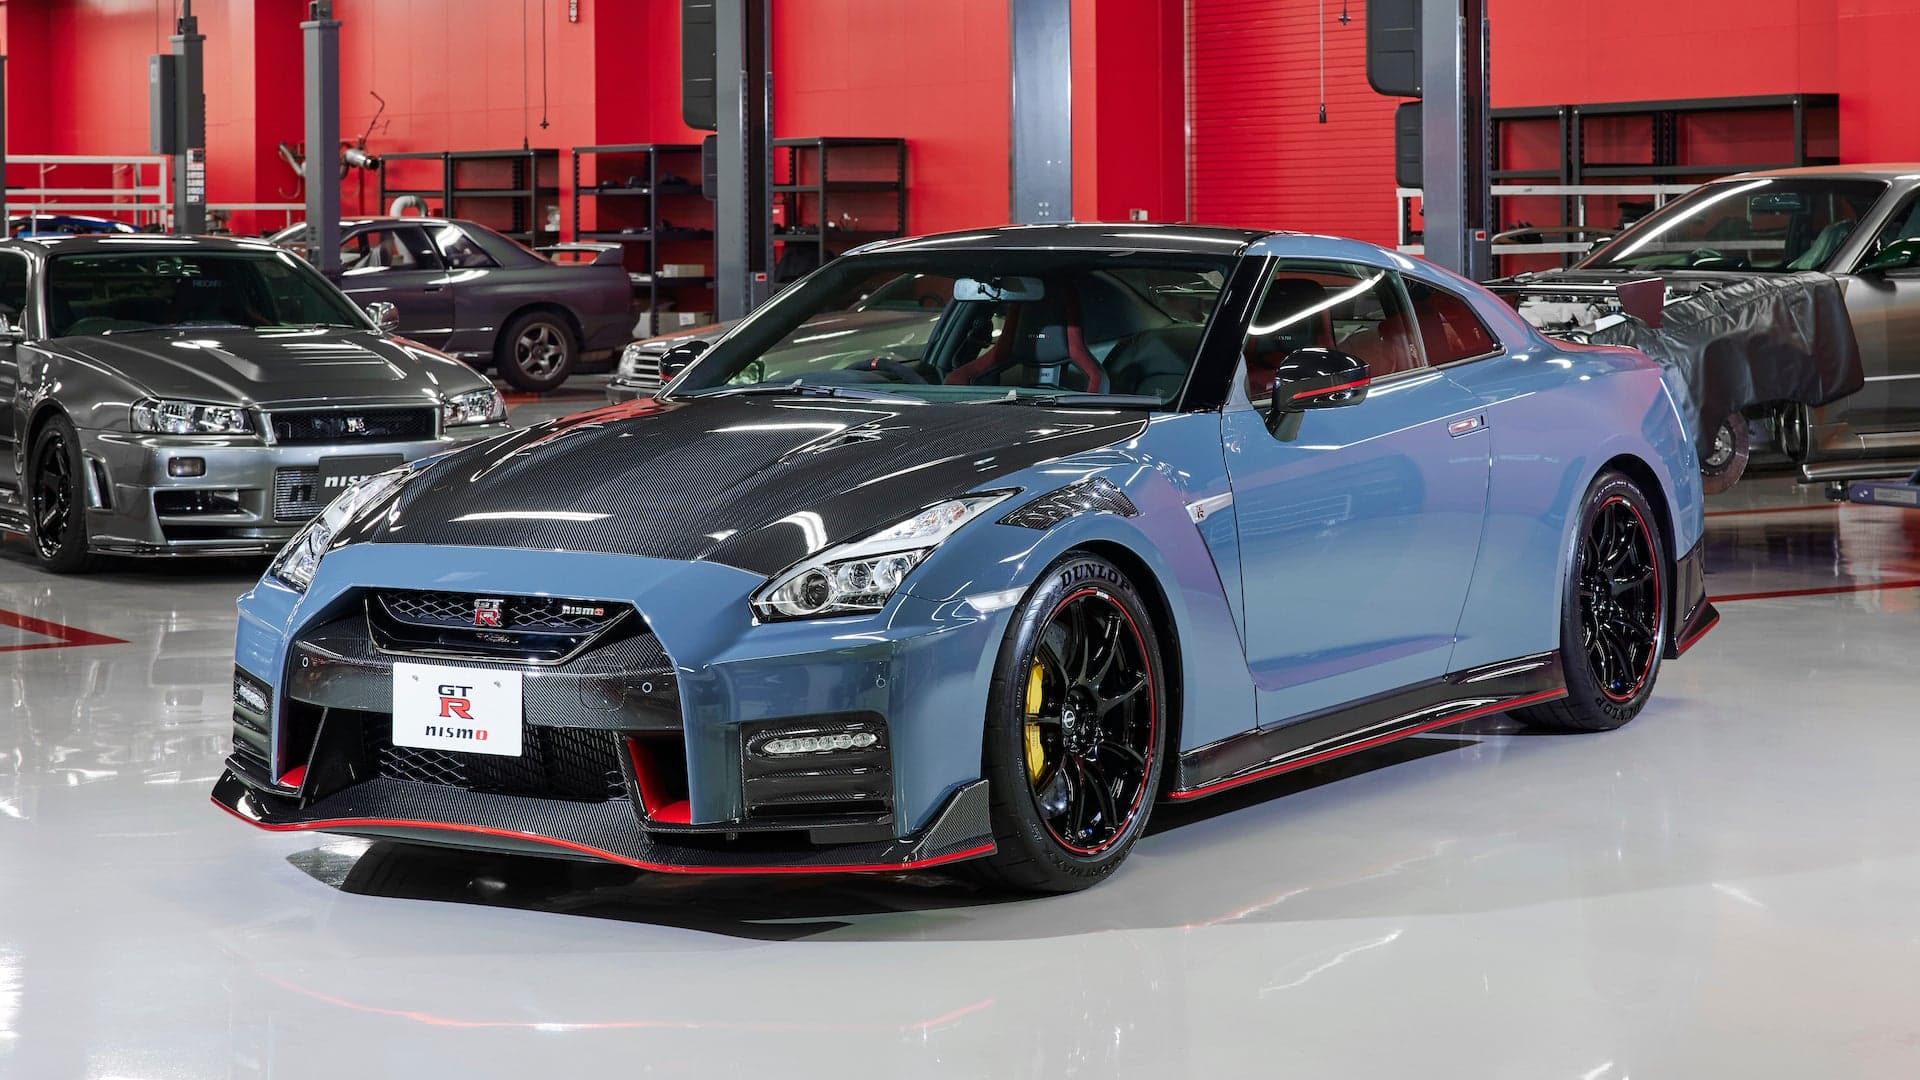 Nissan GT-R Nismo Special Edition: A Carbon Hood and Nissan’s New Logo Sum Up Godzilla’s Latest Goodies